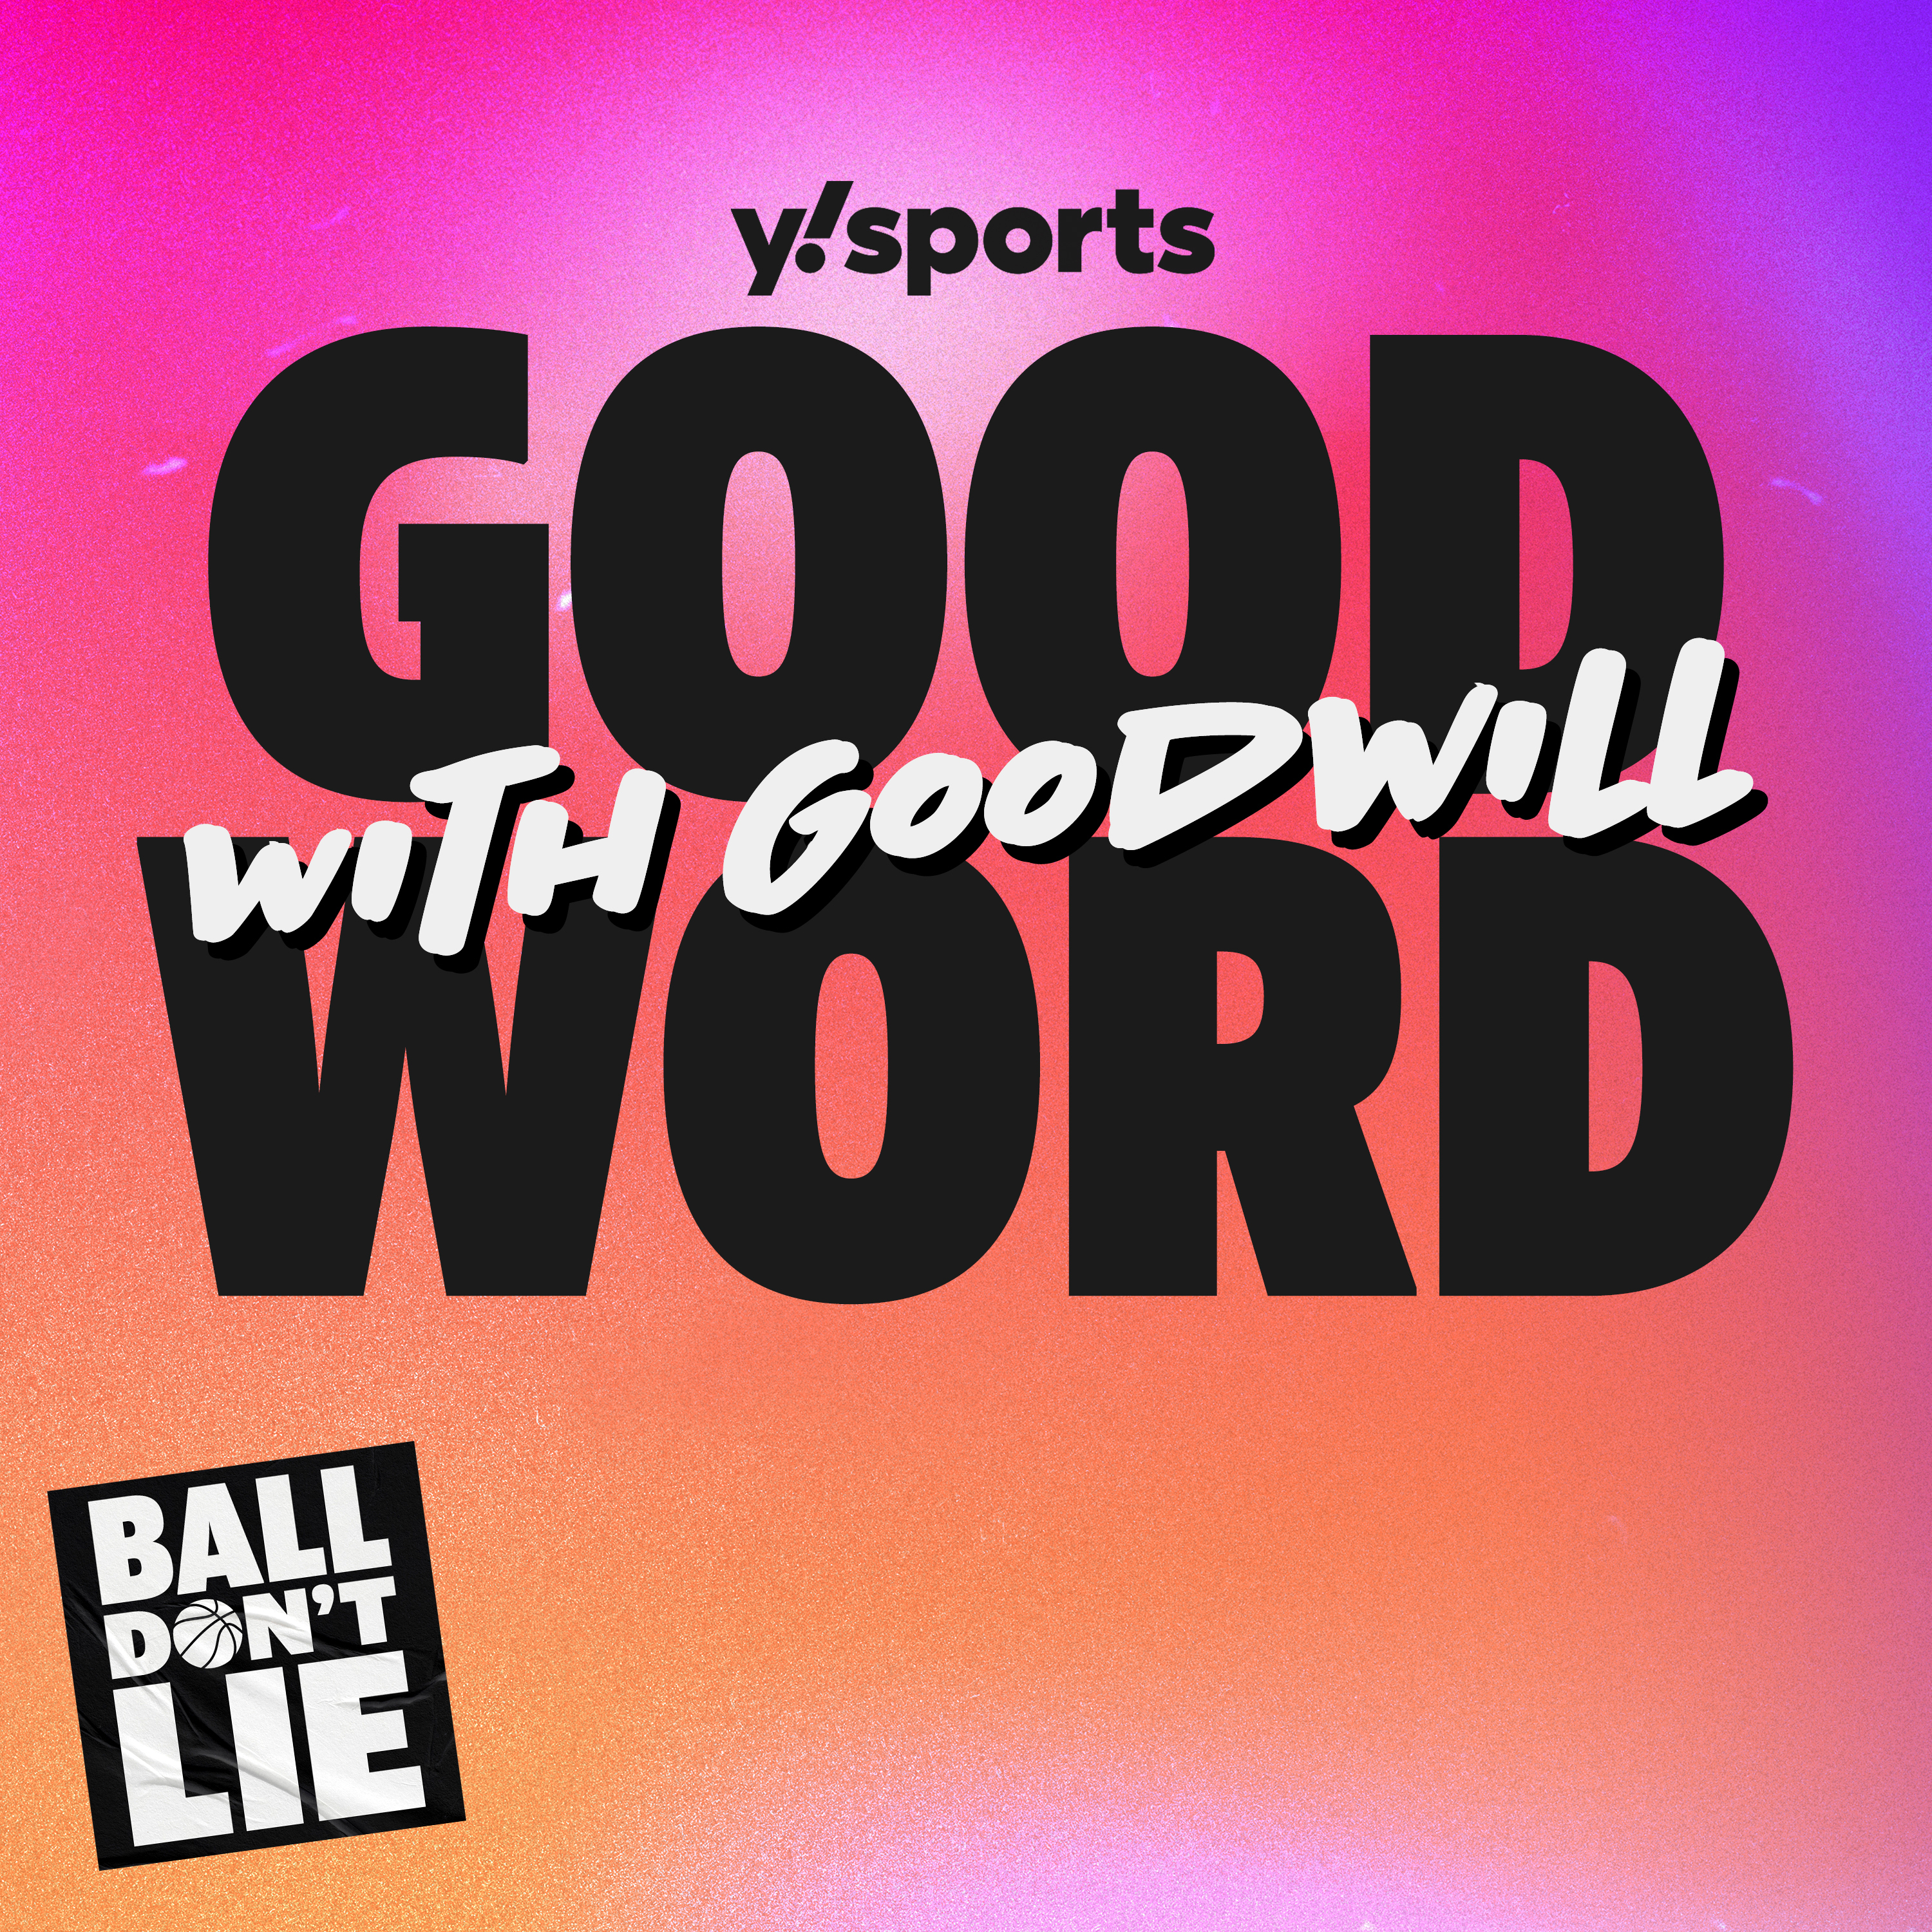 Wolves chase Suns out of NBA Playoffs, Knicks keep rolling & Harden carrying the Clippers | Good Word with Goodwill